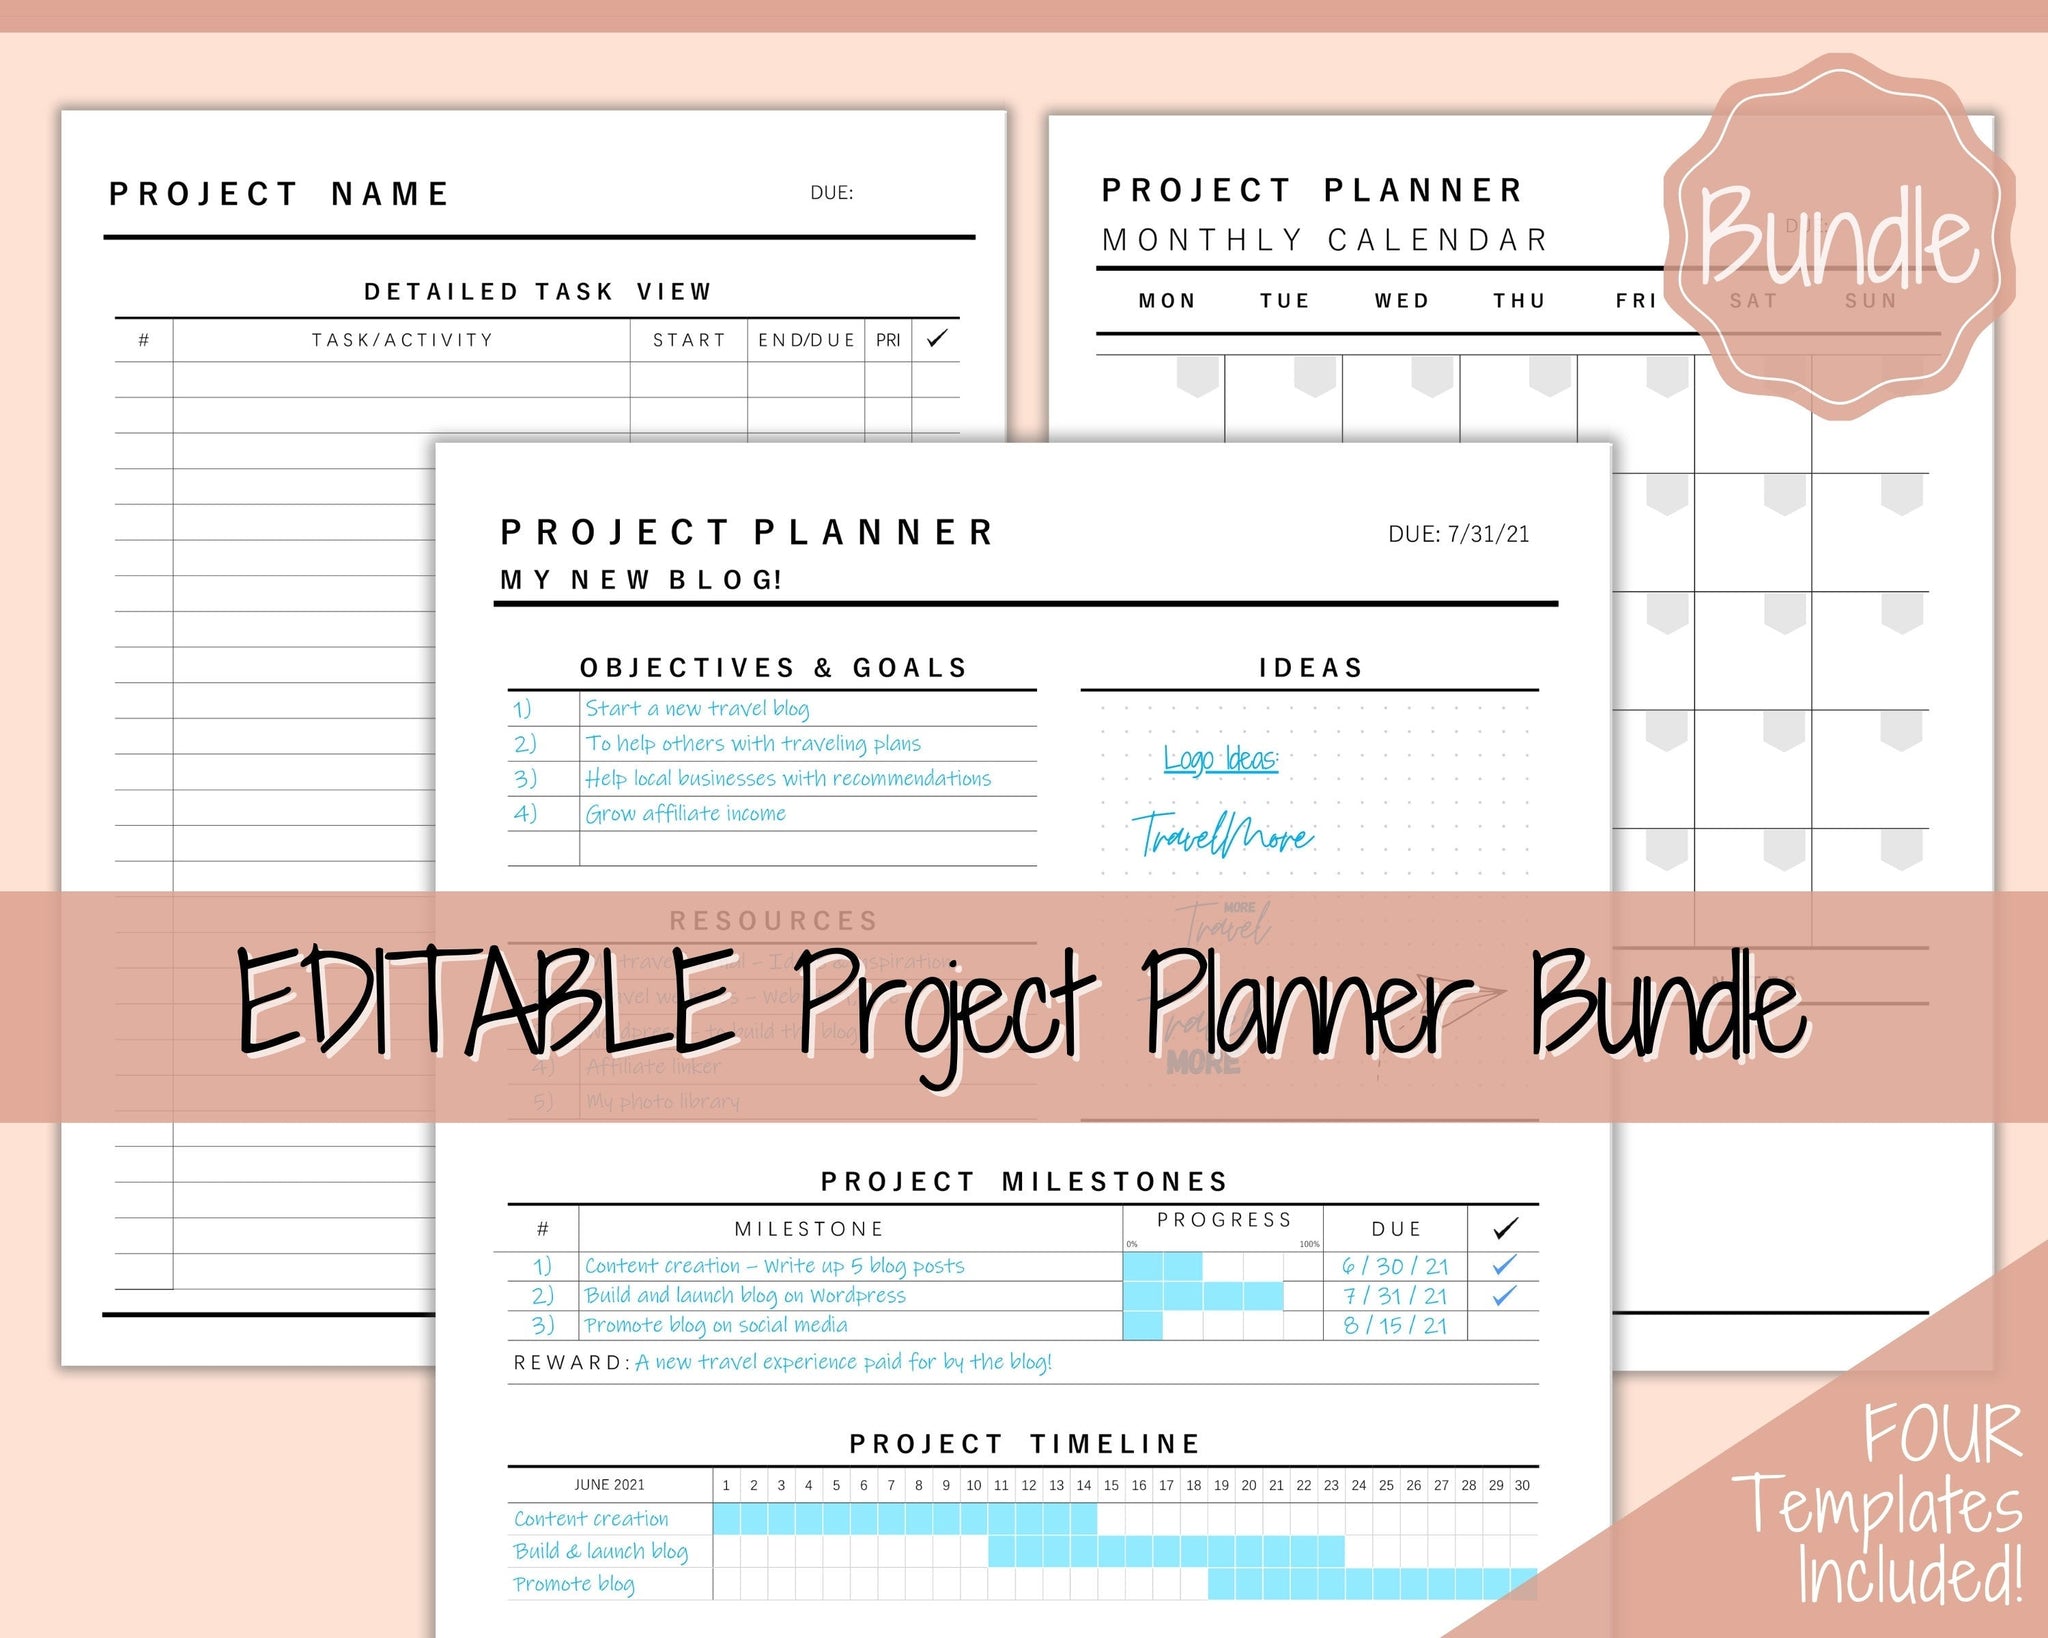 Project Planner 